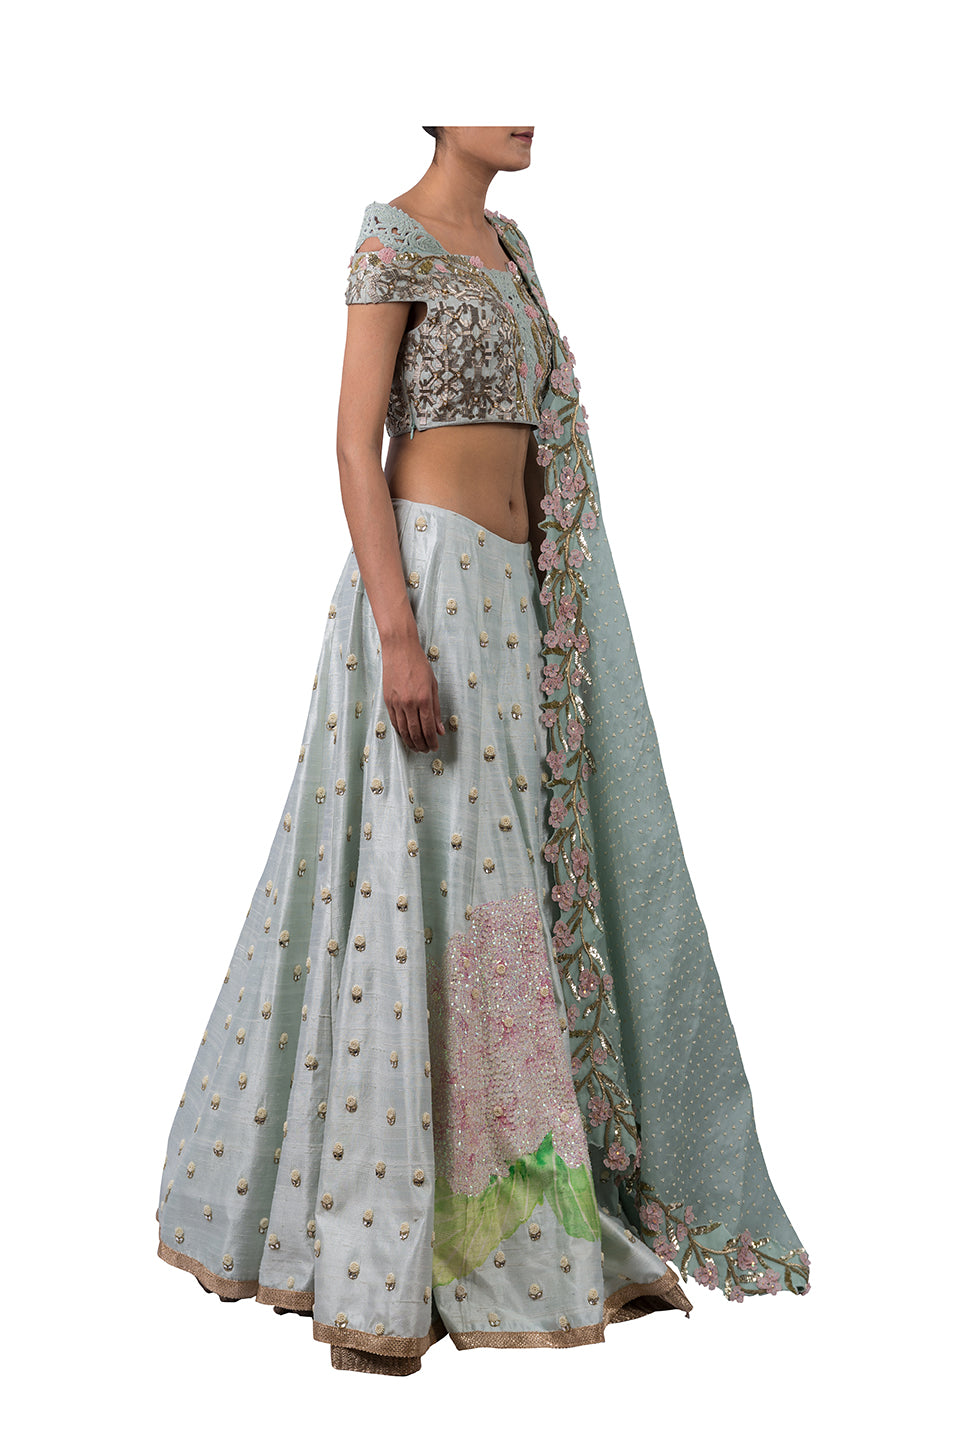 Buy Tarun Tahiliani Womens Egyptian Floral Printed Lehenga With Off Shoulder  Draped Blouse Online - Best Price Tarun Tahiliani Womens Egyptian Floral  Printed Lehenga With Off Shoulder Draped Blouse - Justdial Shop Online.